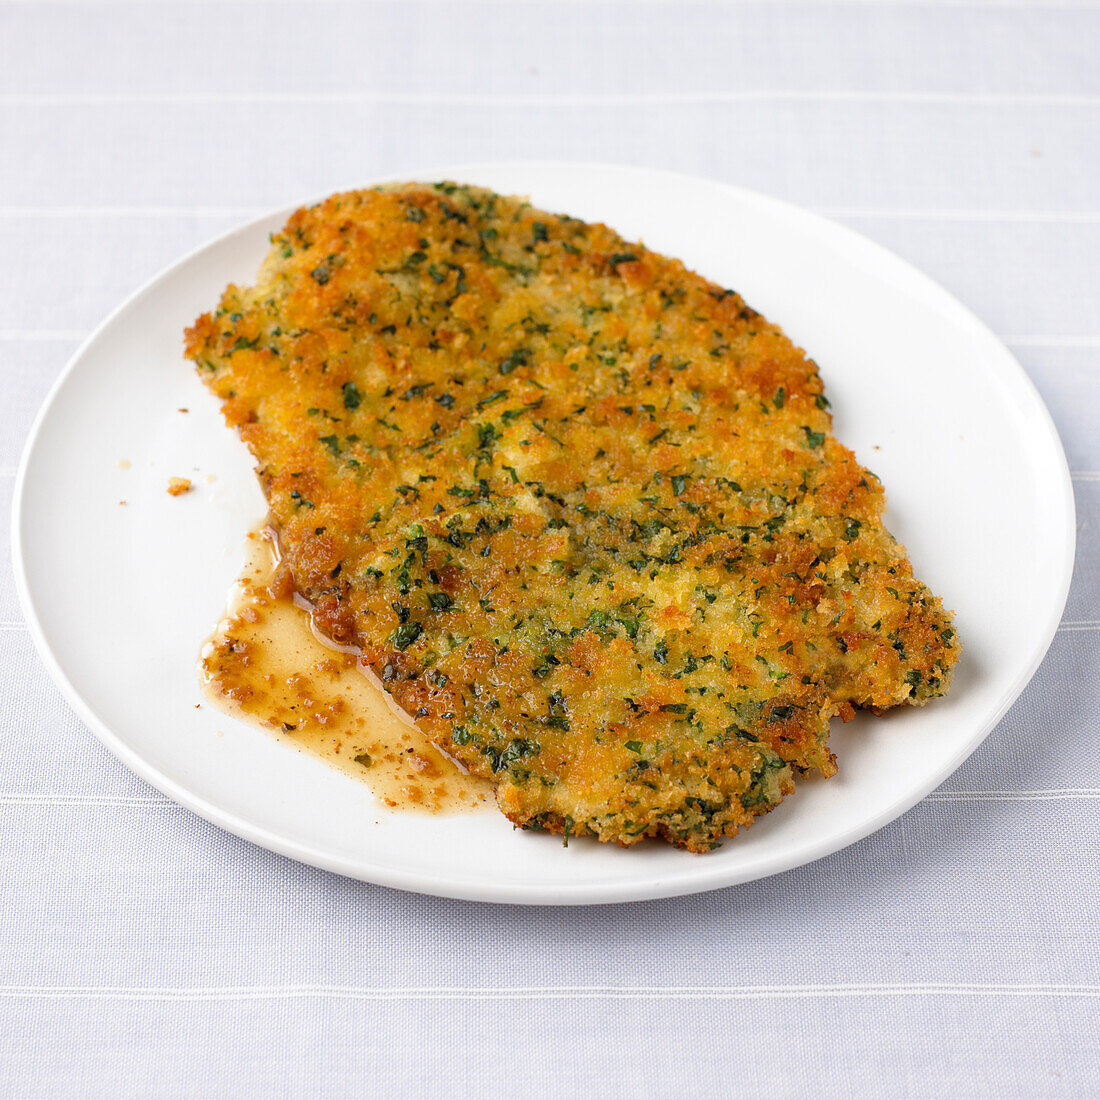 Pork escalopes with breadcrumb and parsley crust